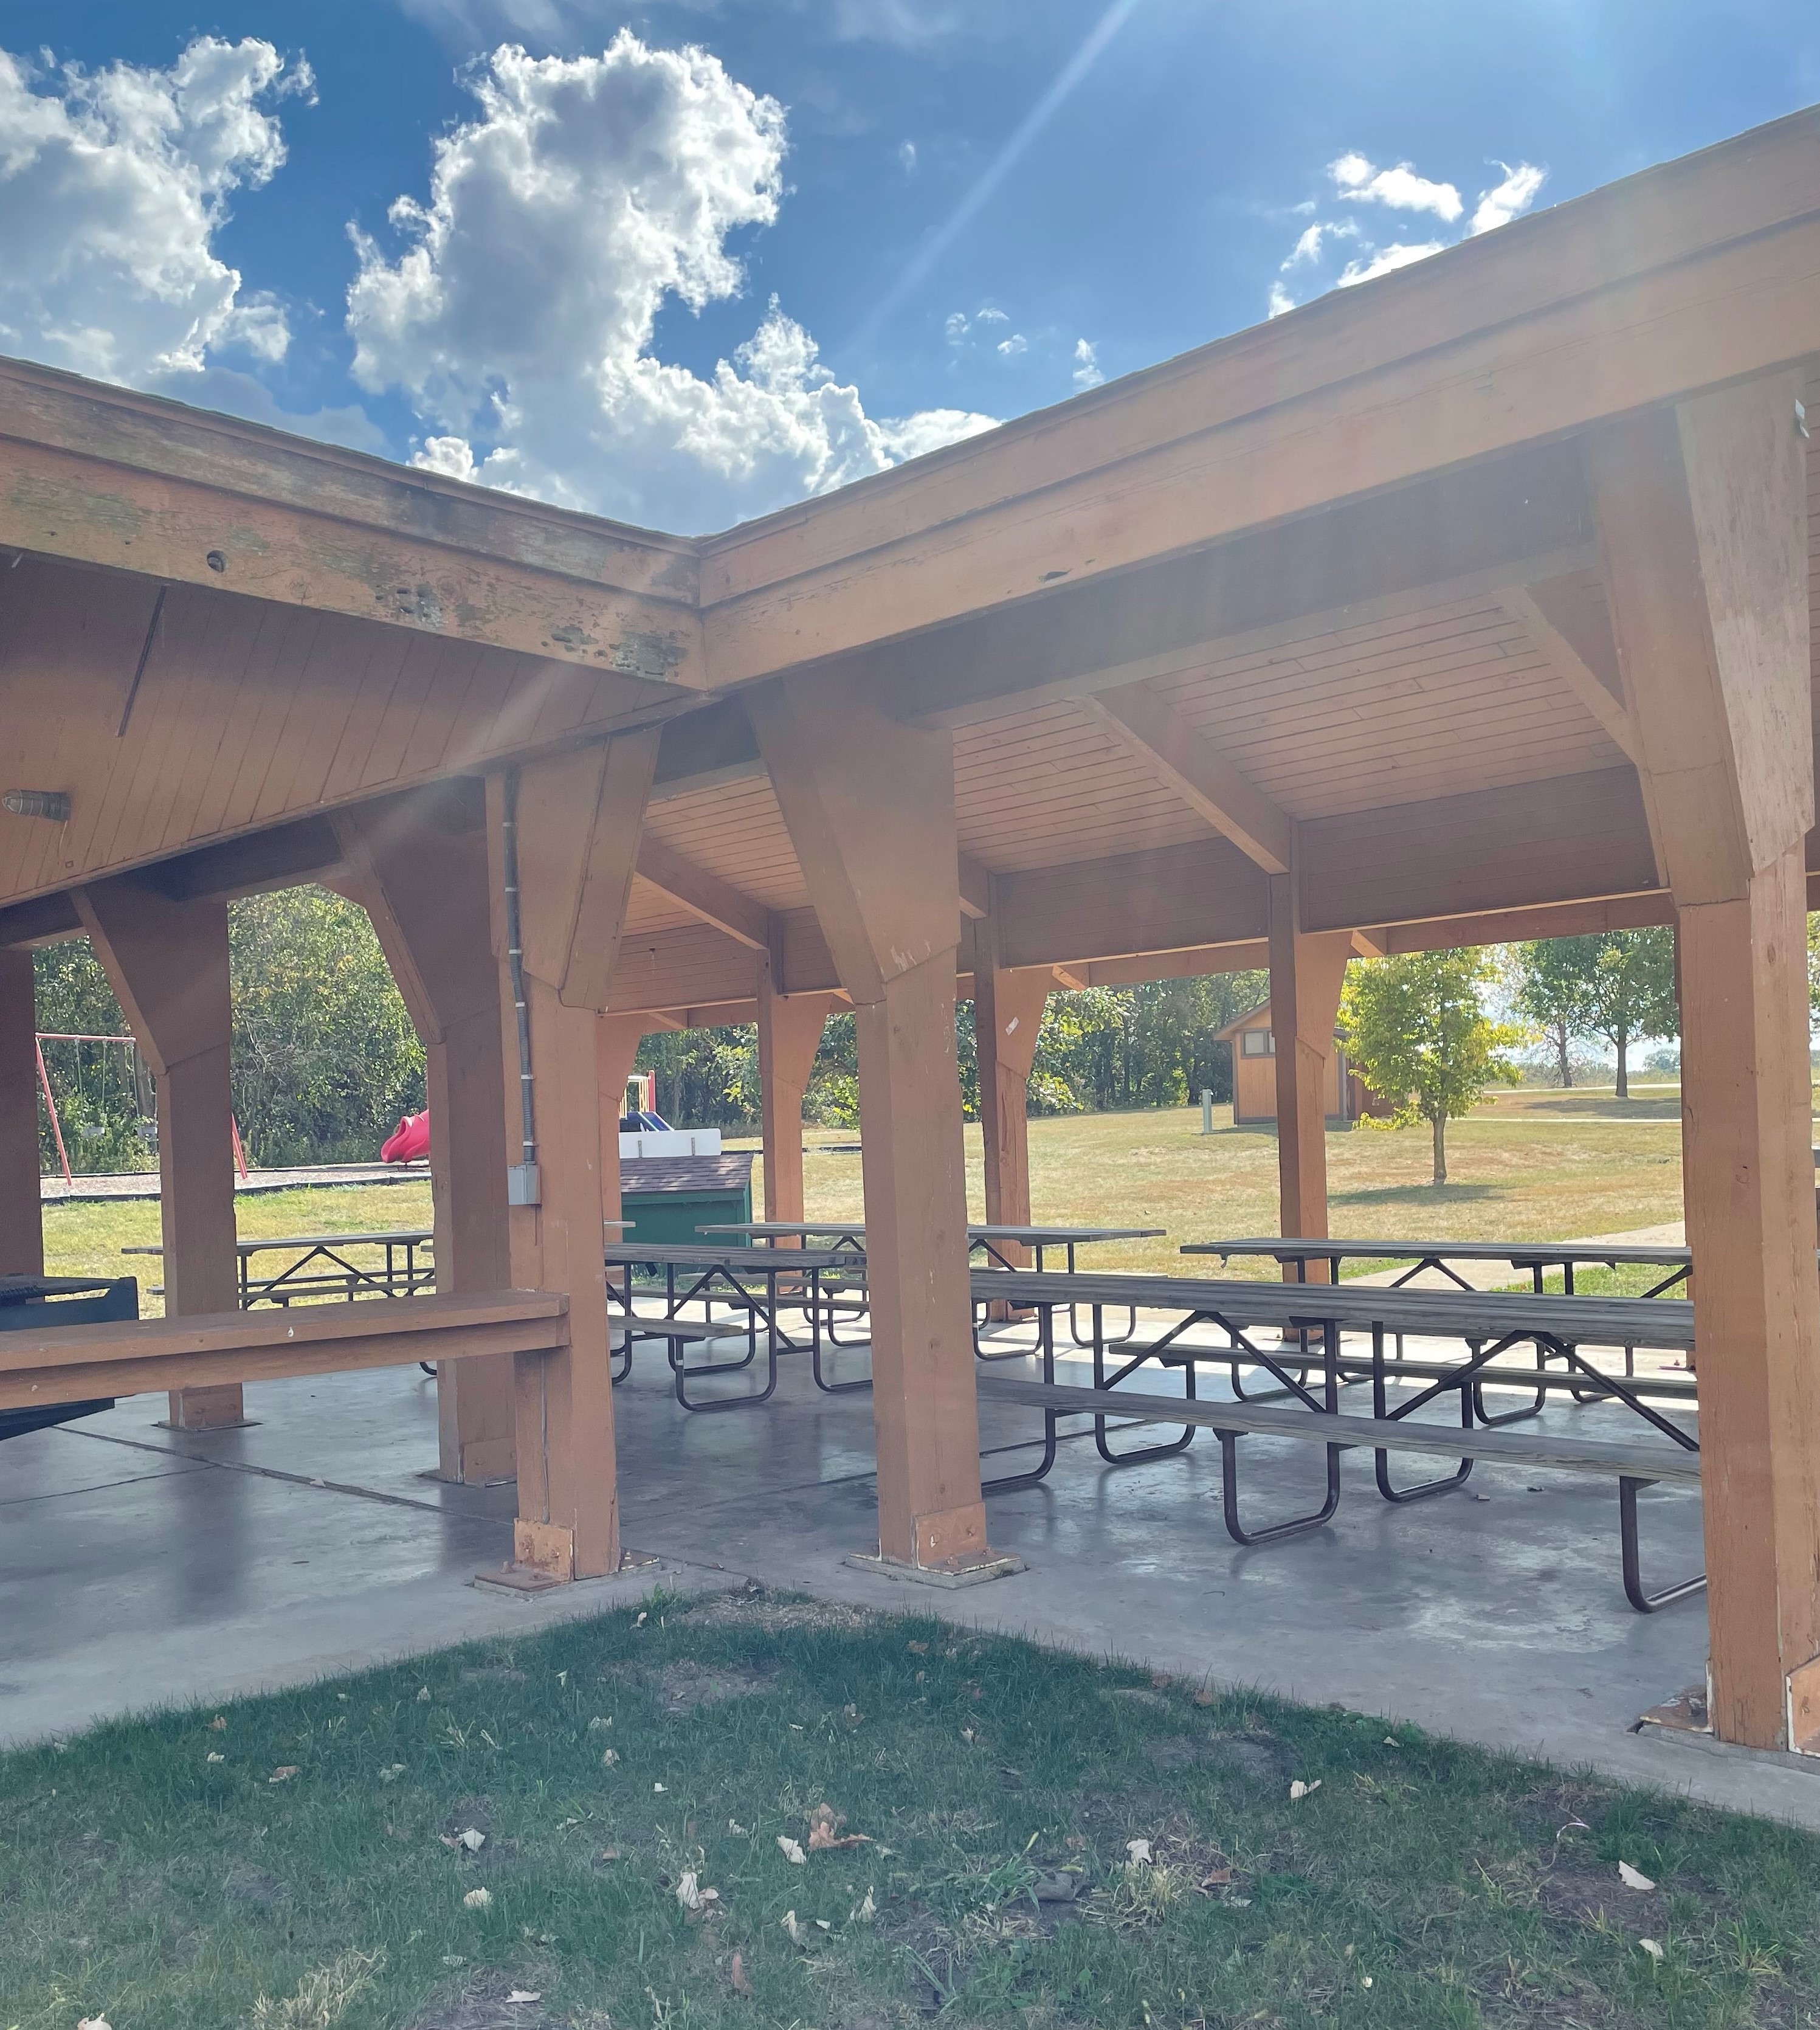 Picnic tables under the roof of the open shelter, with a playground in the background